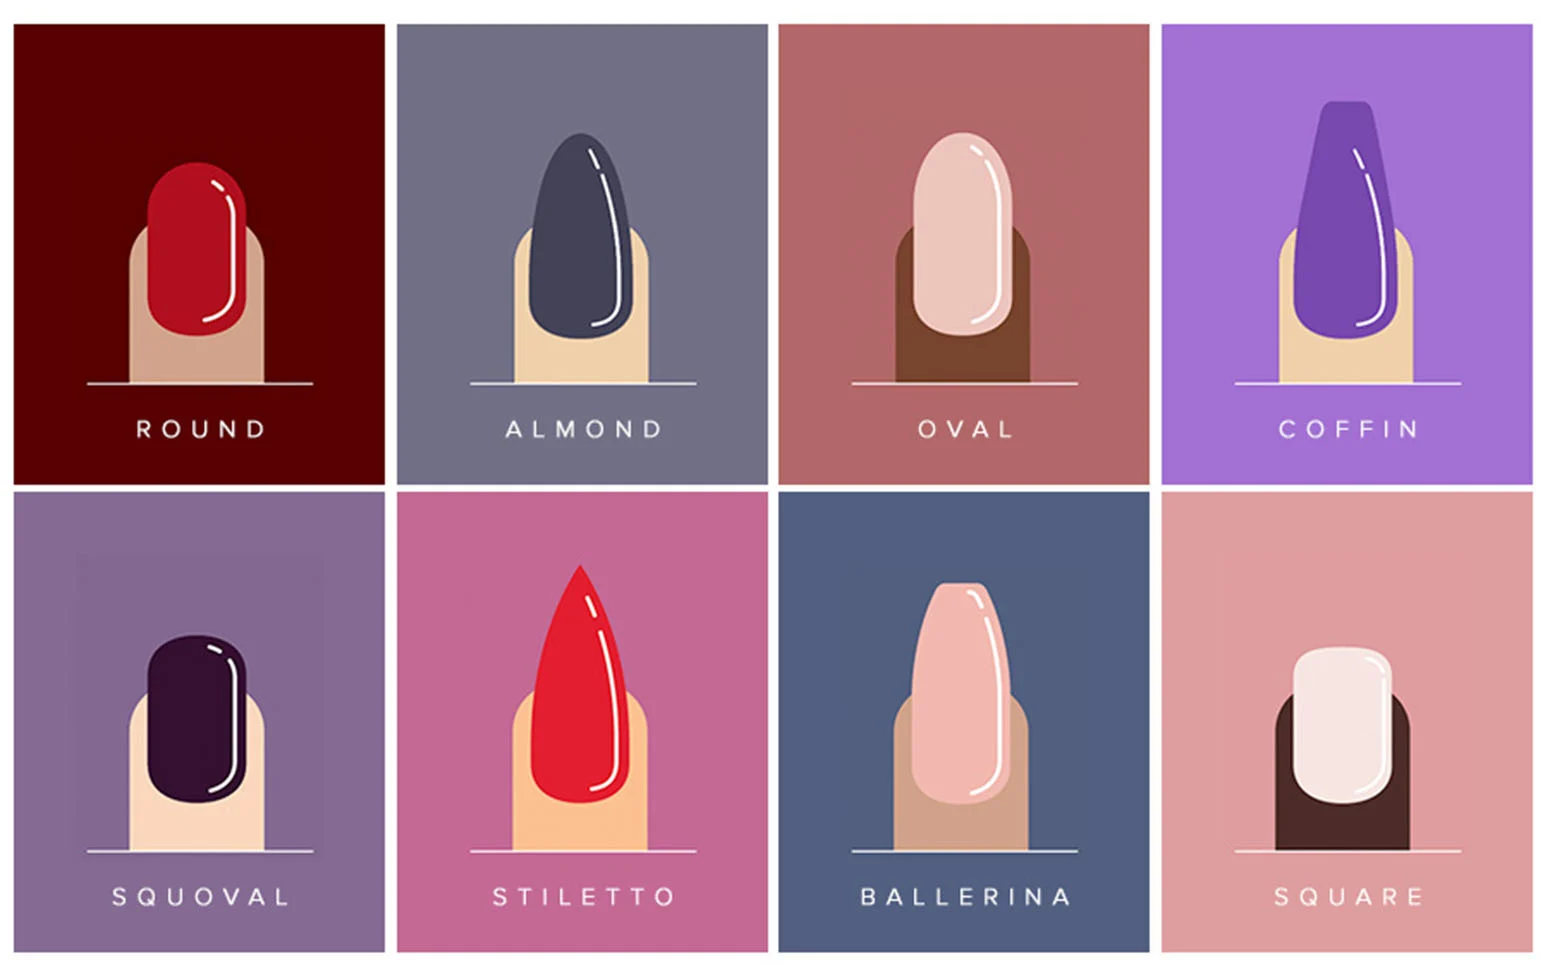 How to Find the Best Nail Shape for your Hands